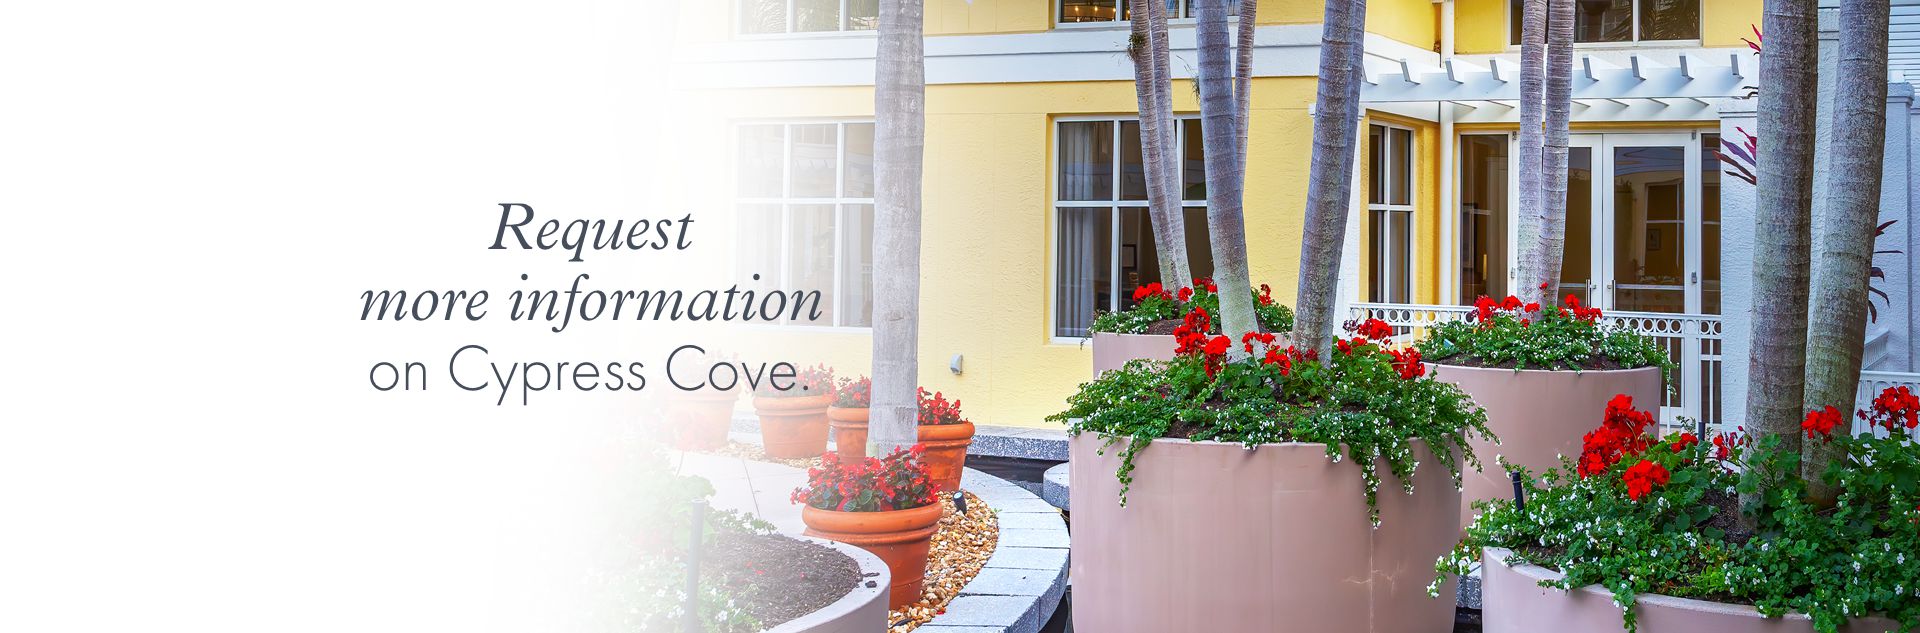 Request more information on Cypress Cove.